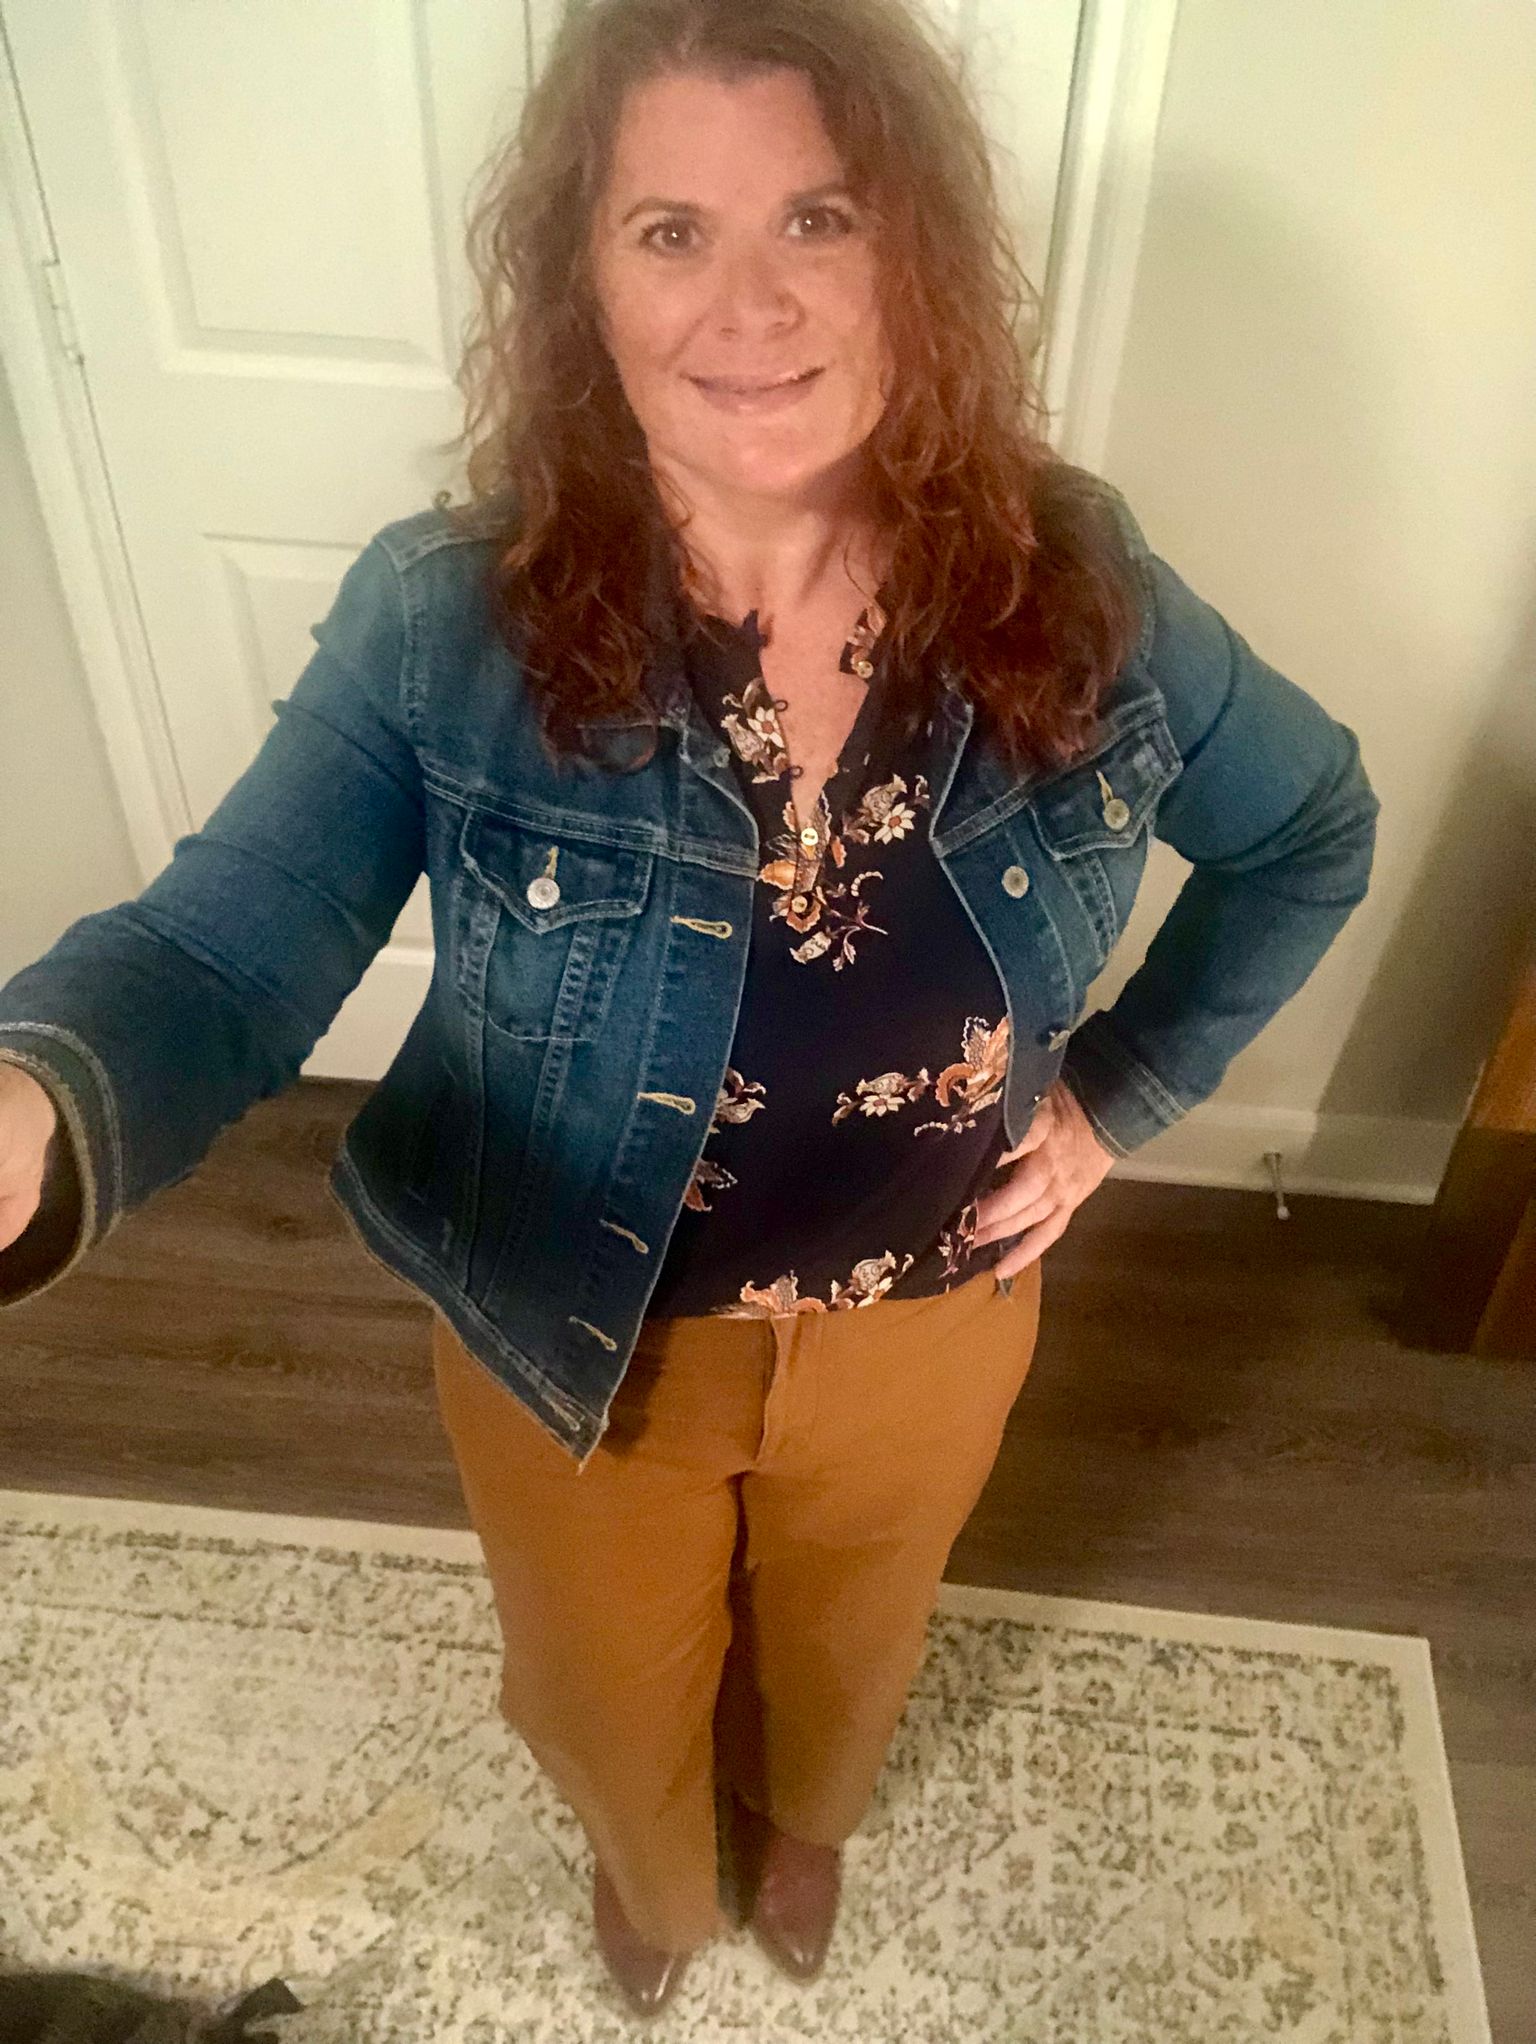 Smiling woman taking a picture of herself wearing a denim jacket, black floral blouse and mustard pants